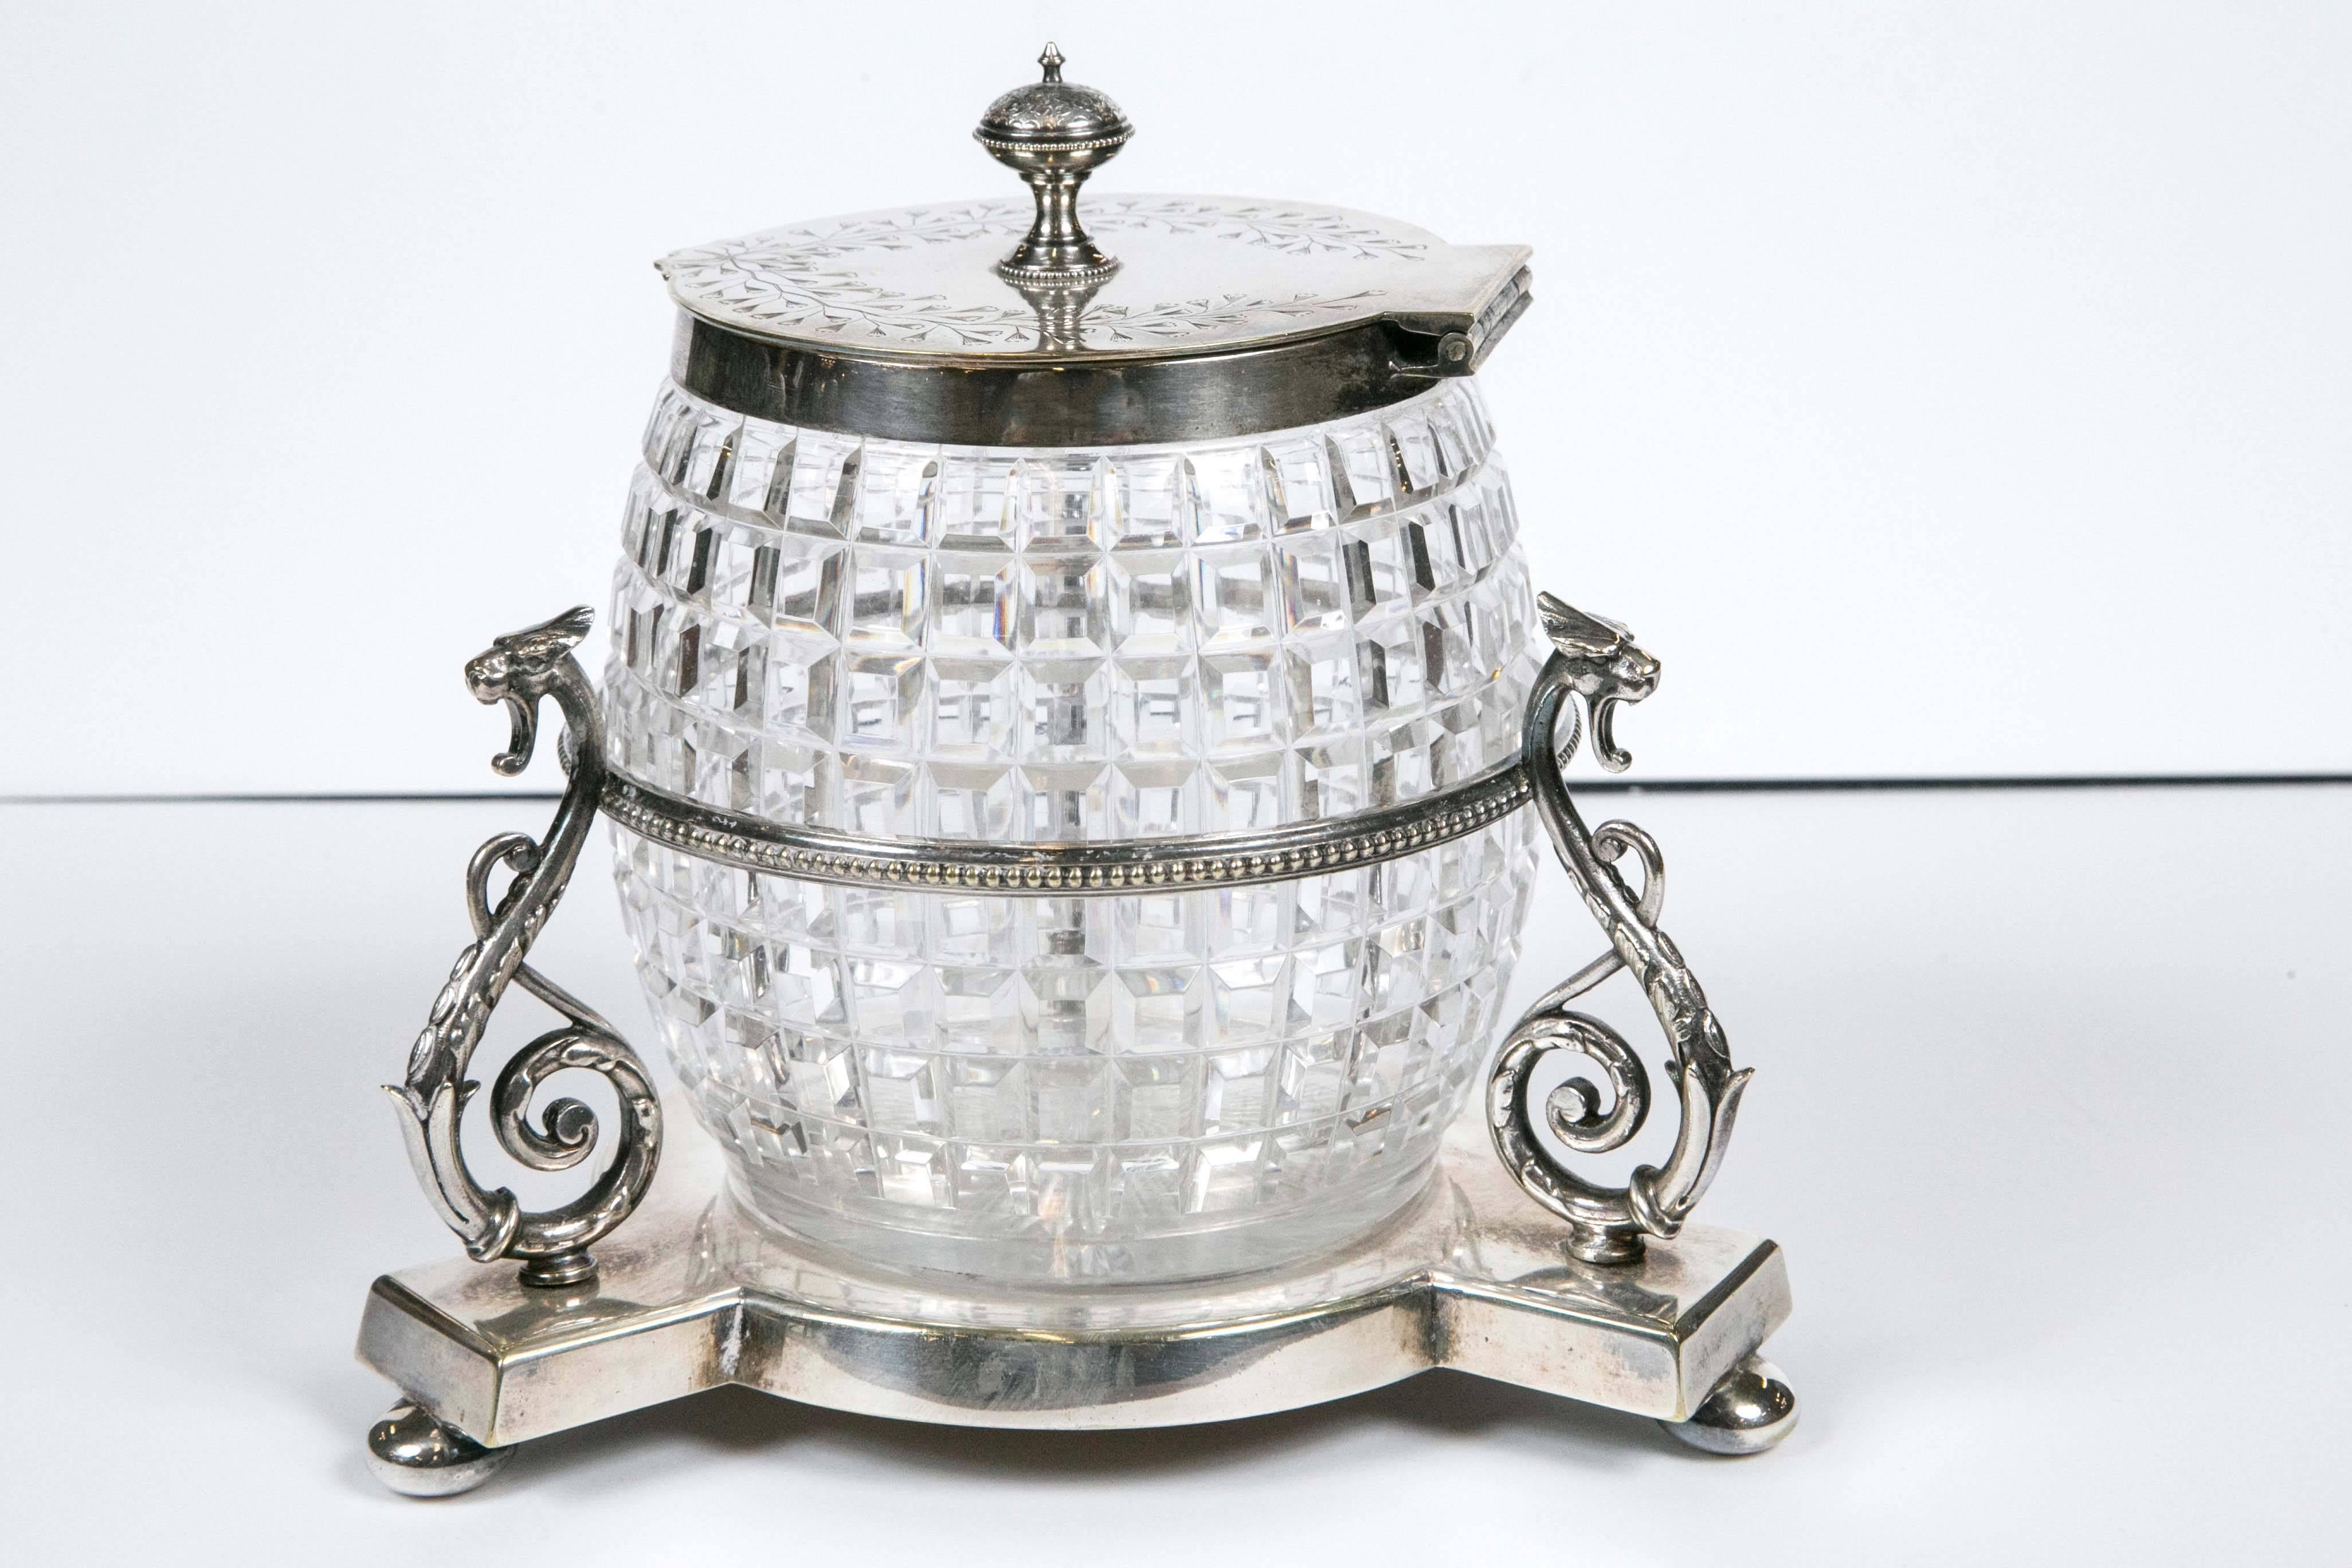 English 1860 crystal biscuit Jar with three serpents on silver plated stand.
This beautiful cut crystal biscuit jar has a brilliant diamond cut pattern.
One item from a large collection which we have acquired from a private collector.